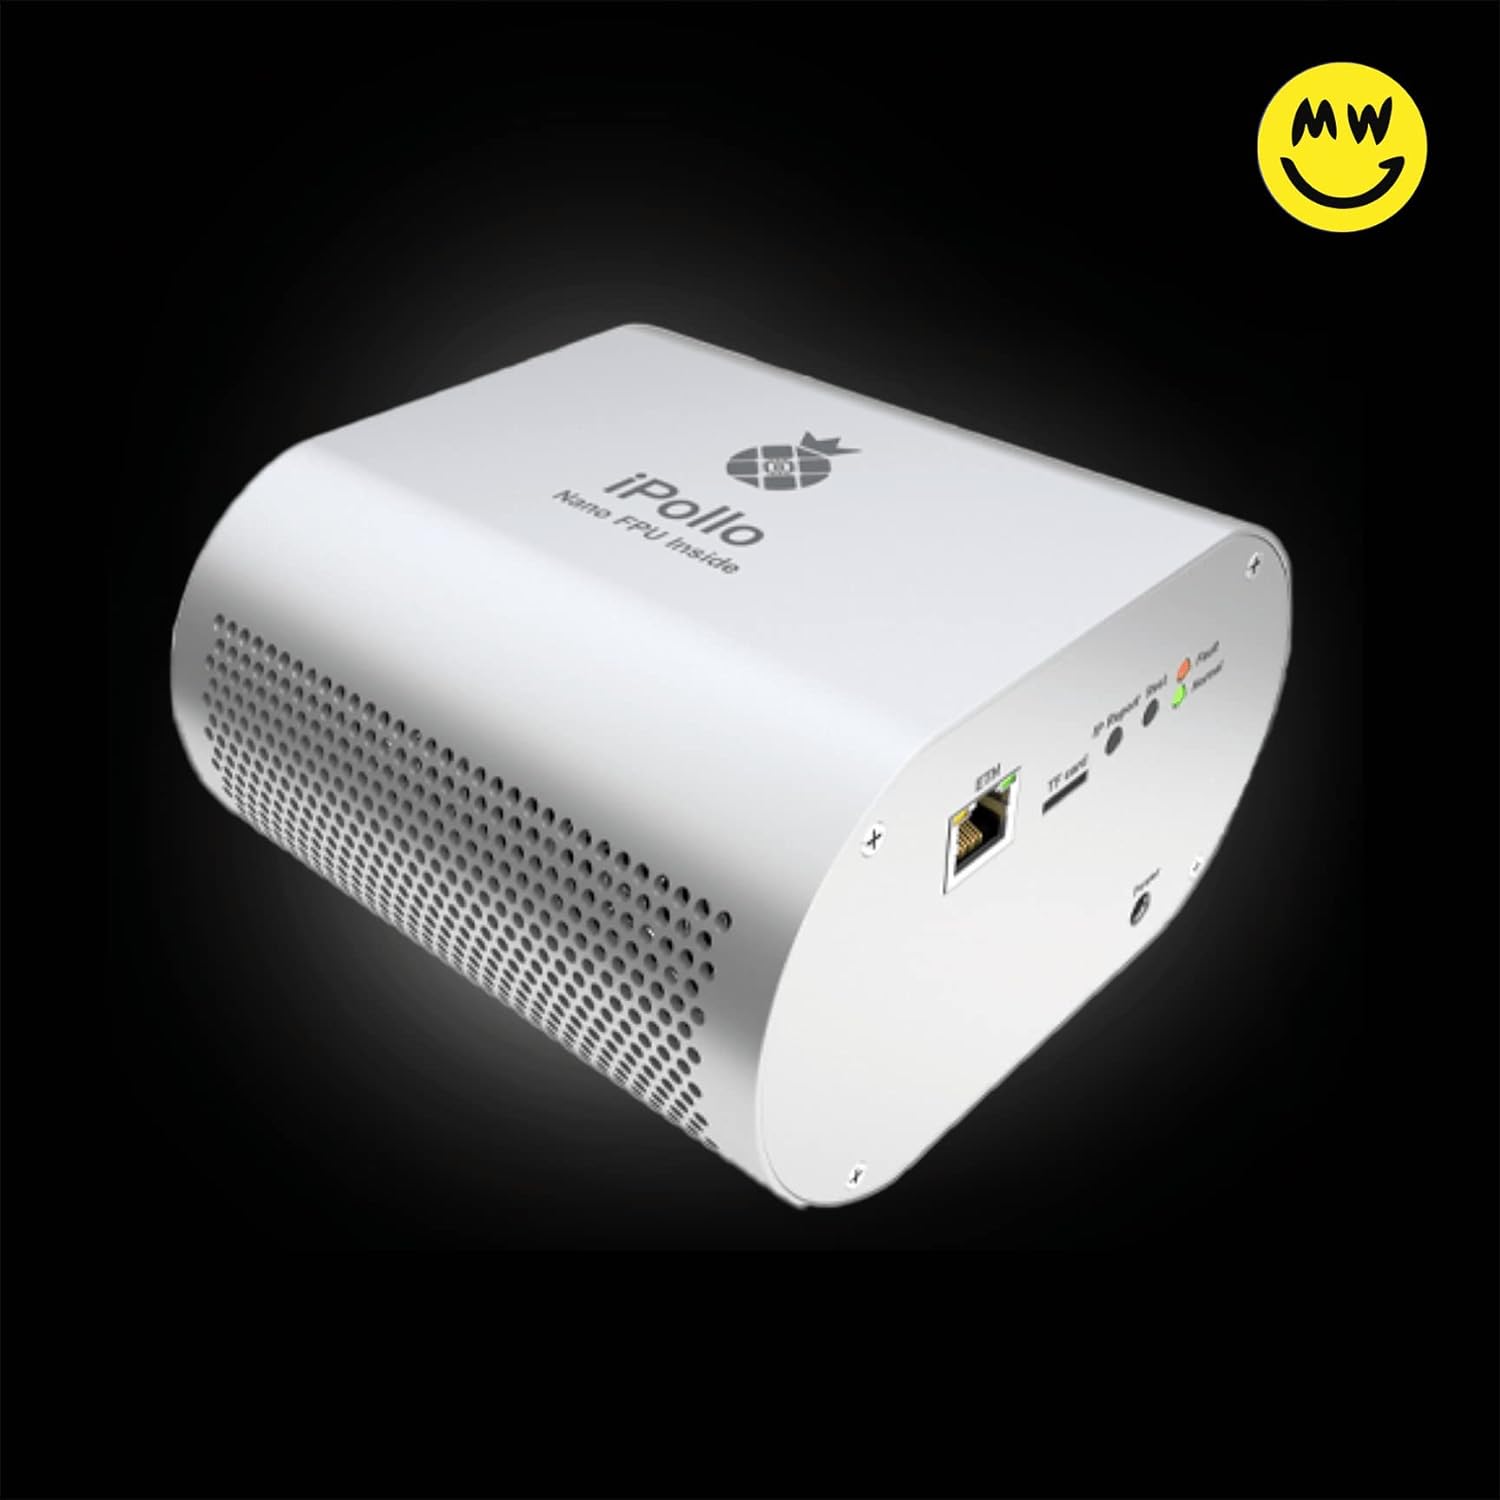 New iPollo G1 Mini Asic Miner Crypto Miner 1.2G/s Home Miner with PSU by OEMGMINER